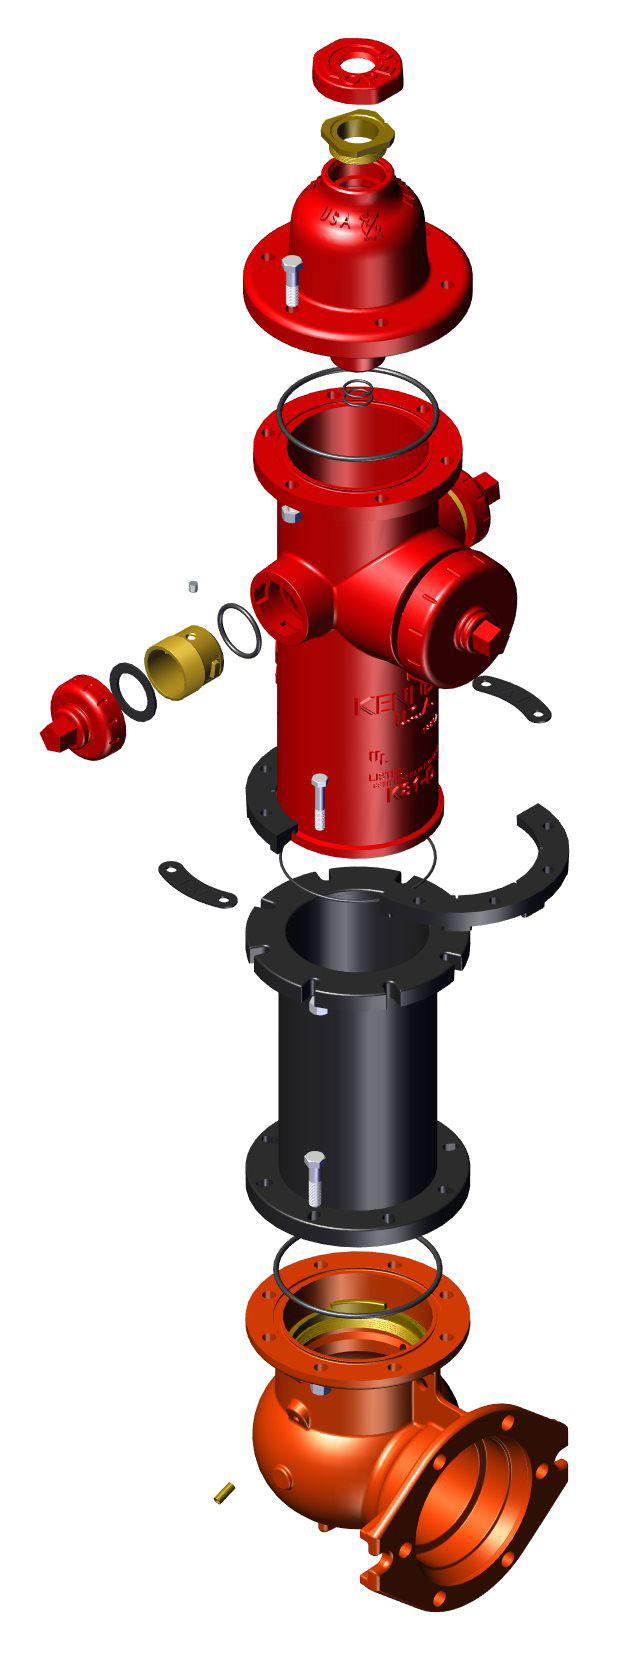 HYDRANT ASSEMBLY CALLOUT DESCRIPTION MATERIAL K8101 ALEMITE FITTING STAINLESS STEEL, ASTM A276 (304) K8102 OPERATING STEM NUT BRONZE, ASTM B584 C83600/C84400 K8103 DIRT SHIELD CAST IRON, ASTM A126,